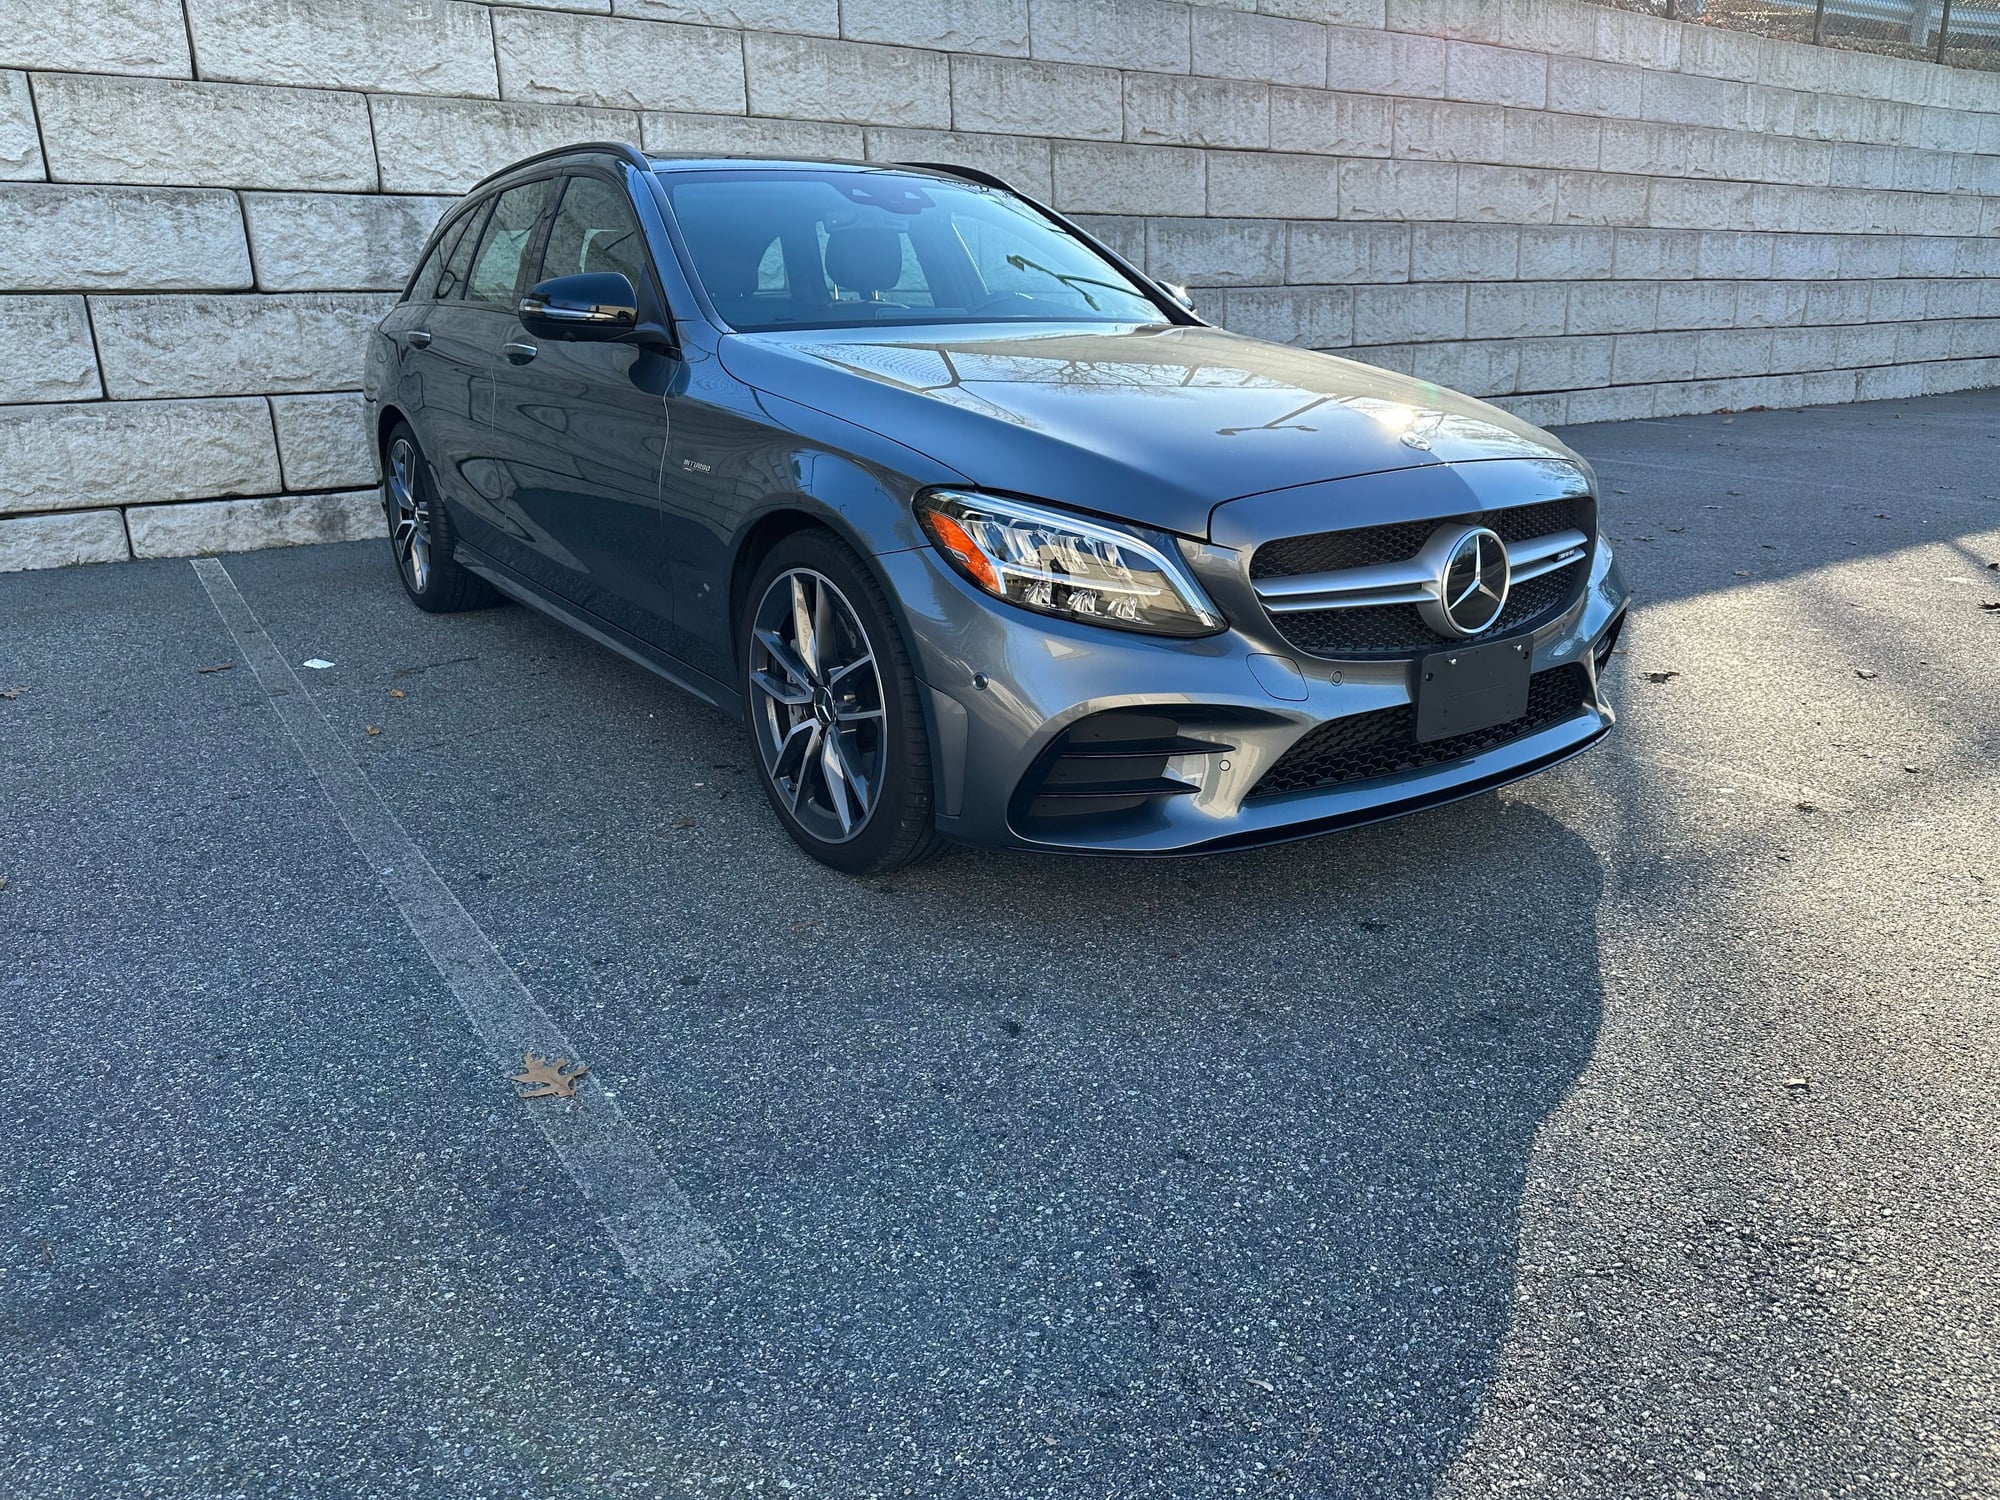 2019 Mercedes-Benz C43 AMG - 2019 C43 AMG WAGON//WAGON/WAGON//FOR SALE IN THE UNITED STATES - Used - VIN WDDWH6EB9KF904578 - 8,512 Miles - 6 cyl - AWD - Automatic - Wagon - Gray - Chelsea, MA 02150, United States